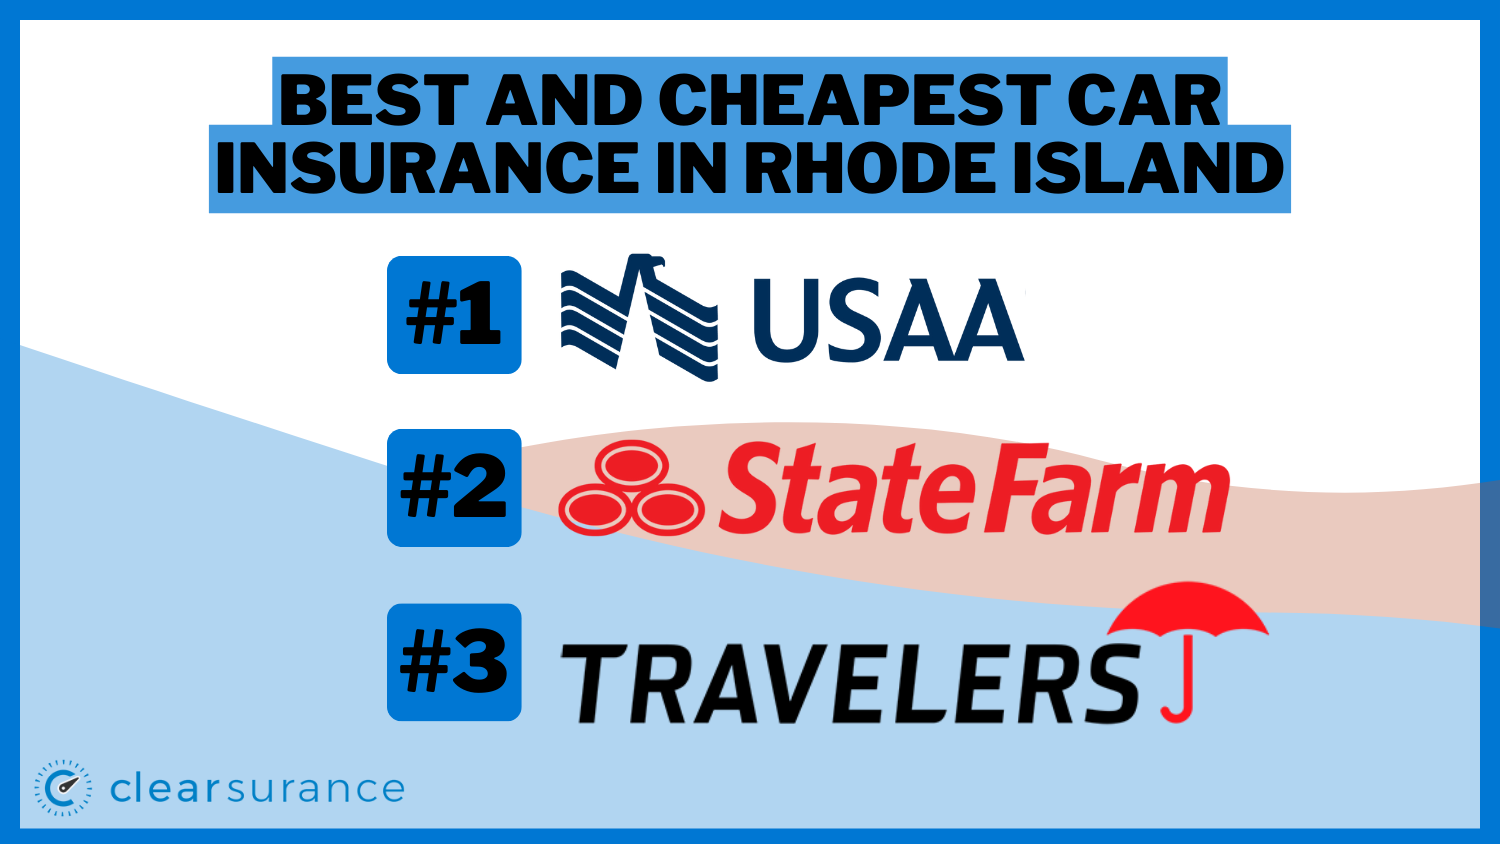 Best and Cheapest Car Insurance in Rhode Island: USAA, State Farm, Travelers